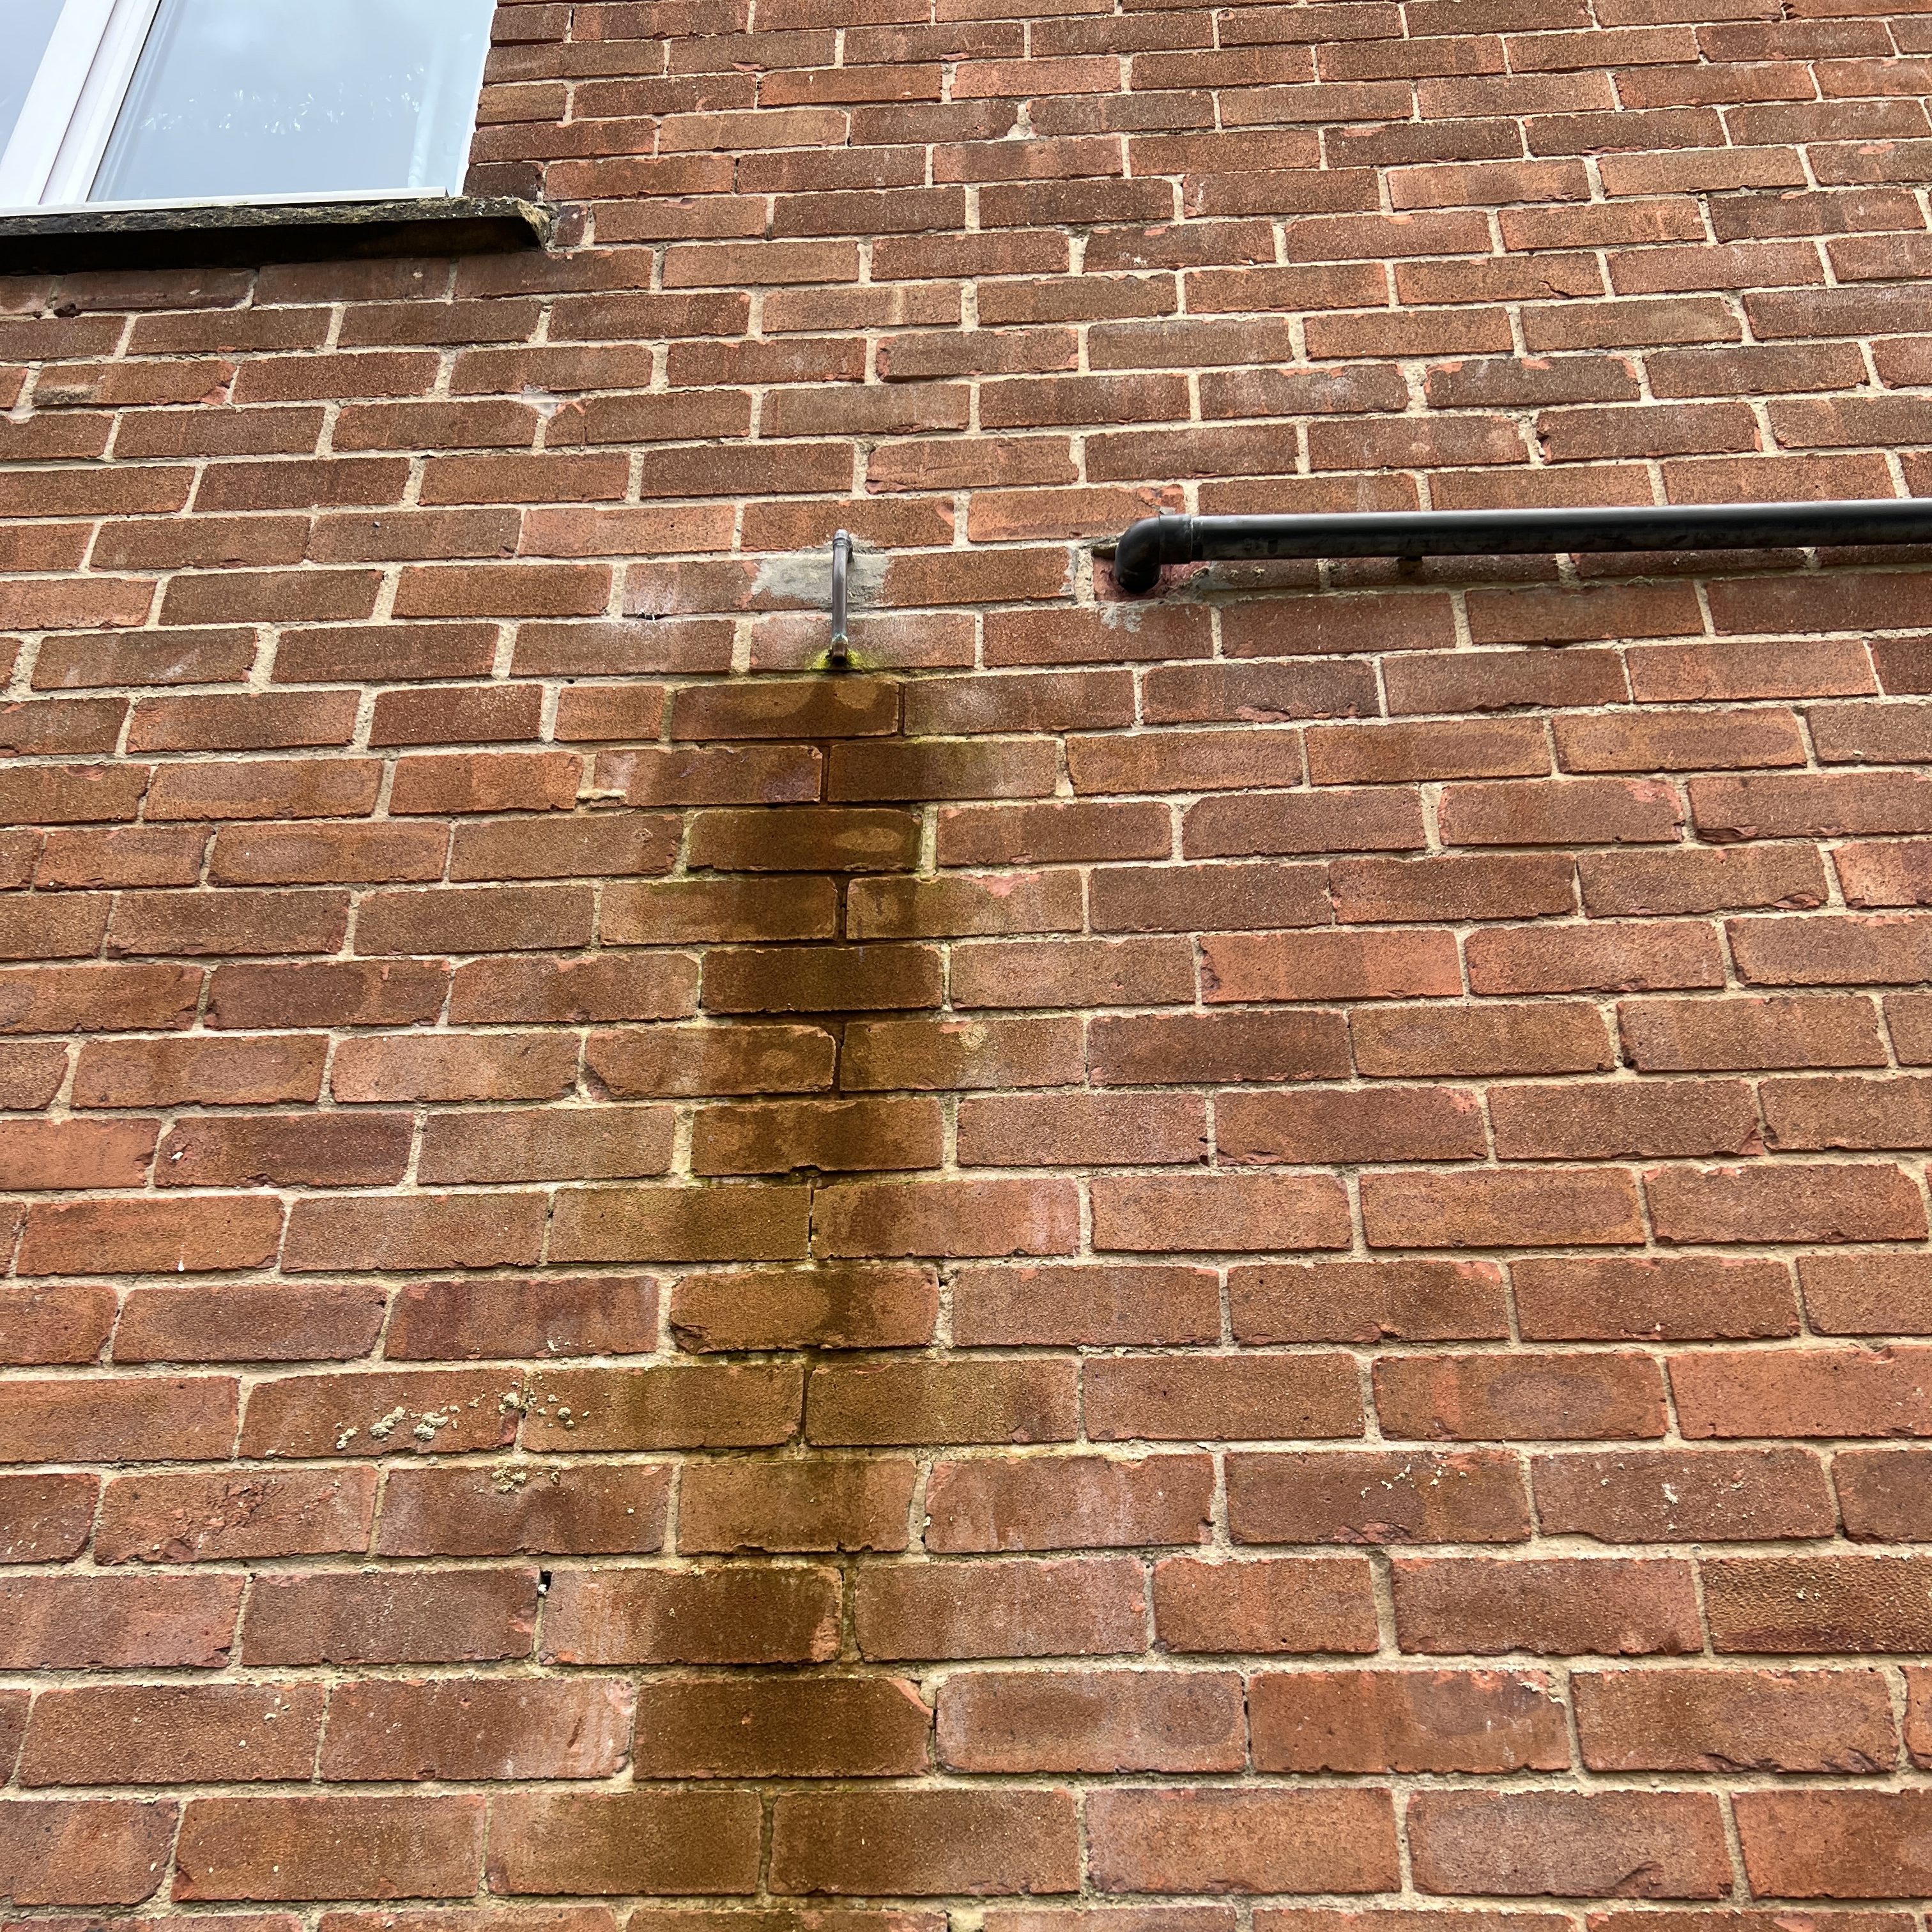 Water coming out of overflow from a metal pipe.